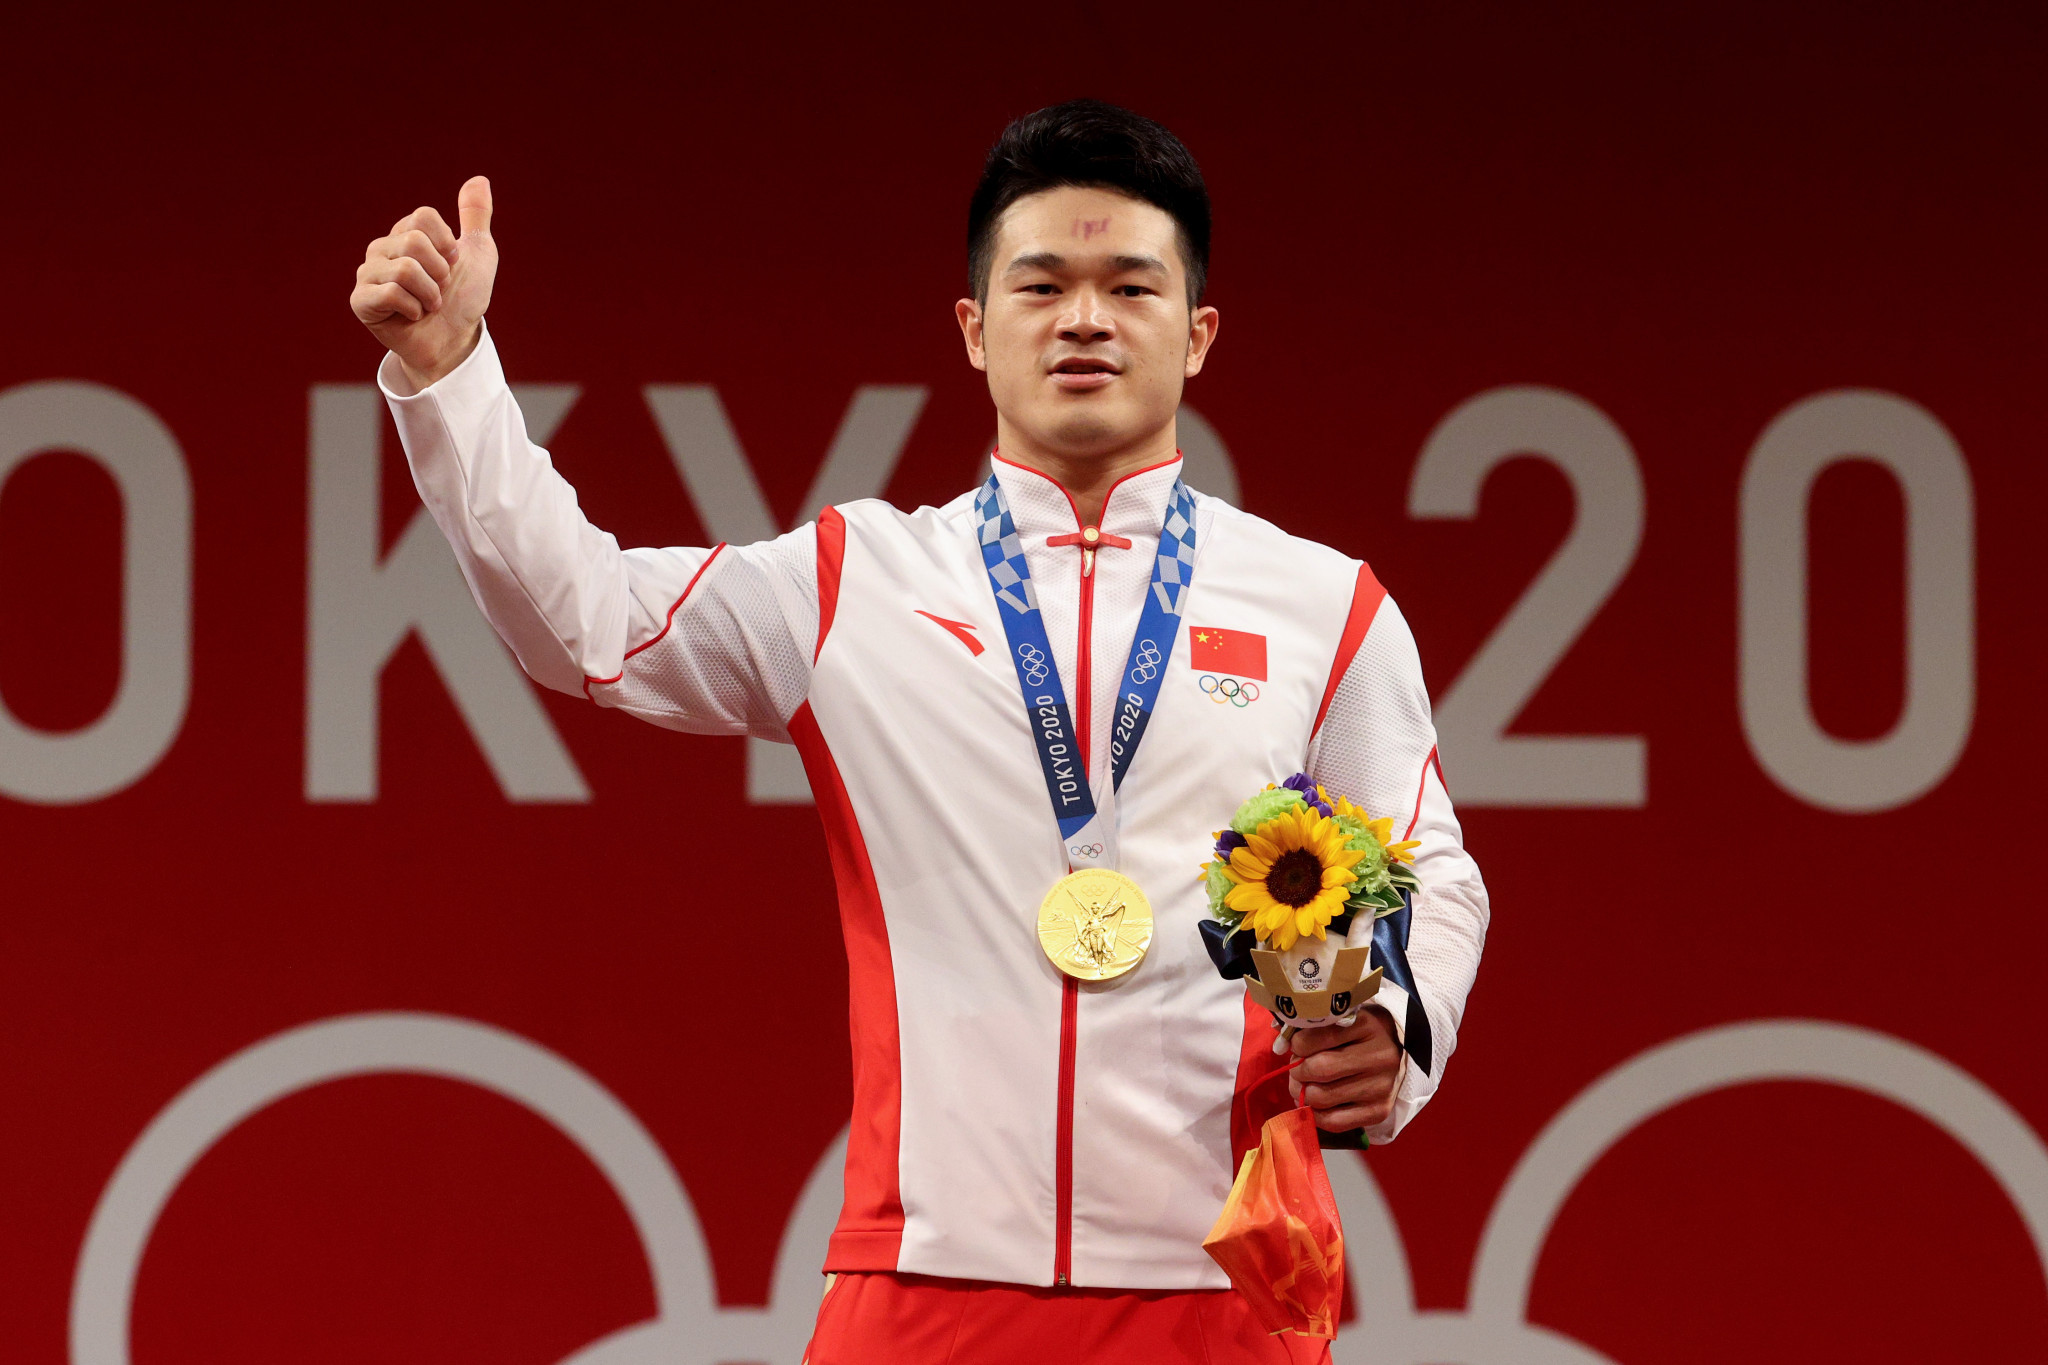 China's Shi Zhiyong is set to lift at the World Weightlifting Championships in Riyadh for the first time since winning Olympic gold at Tokyo 2020 ©Getty Images